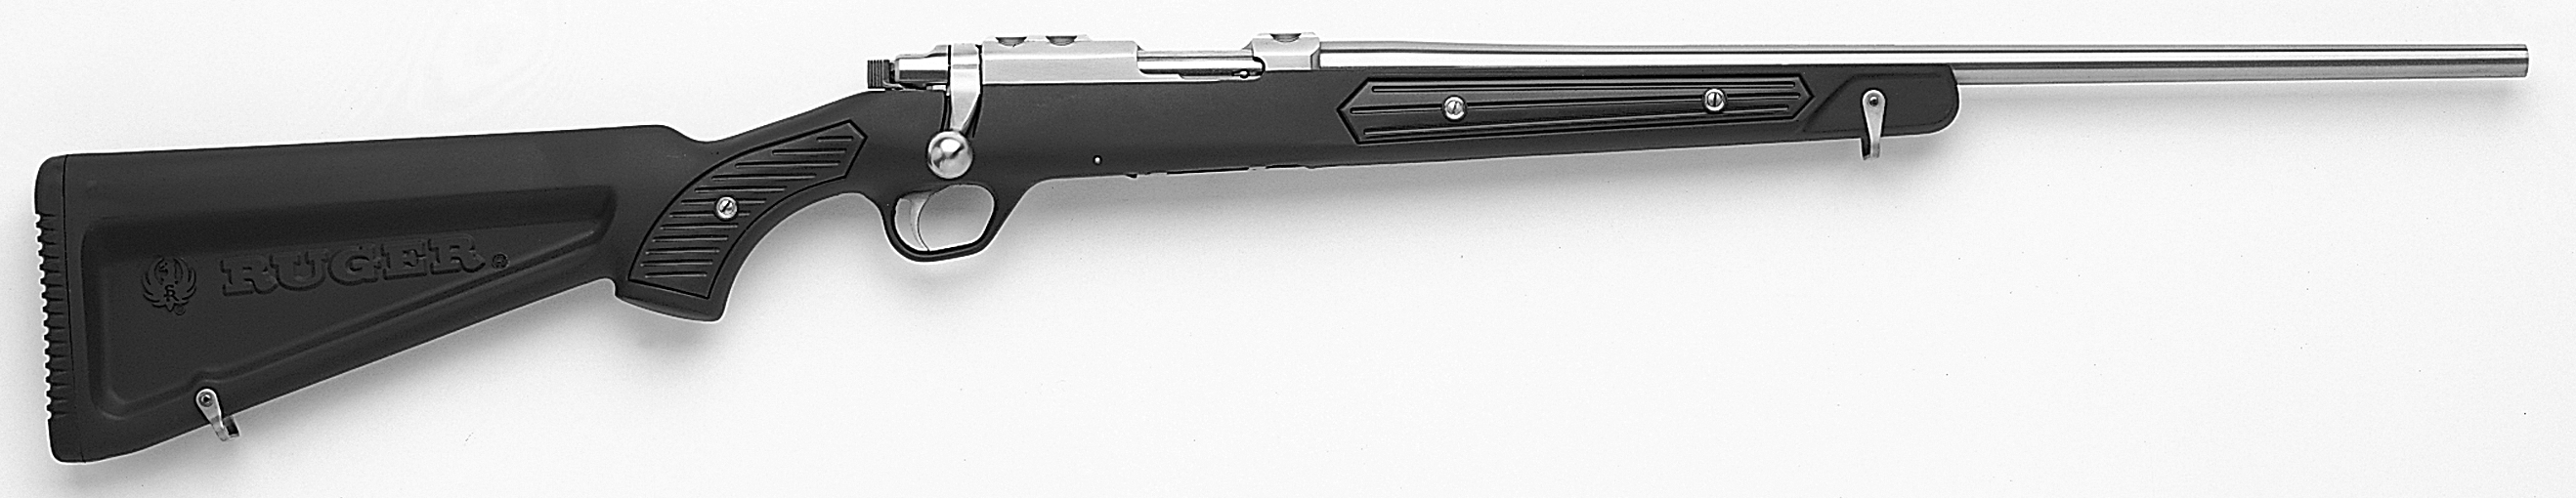 Model 77/22 Stainless Steel/Synthetic Stock